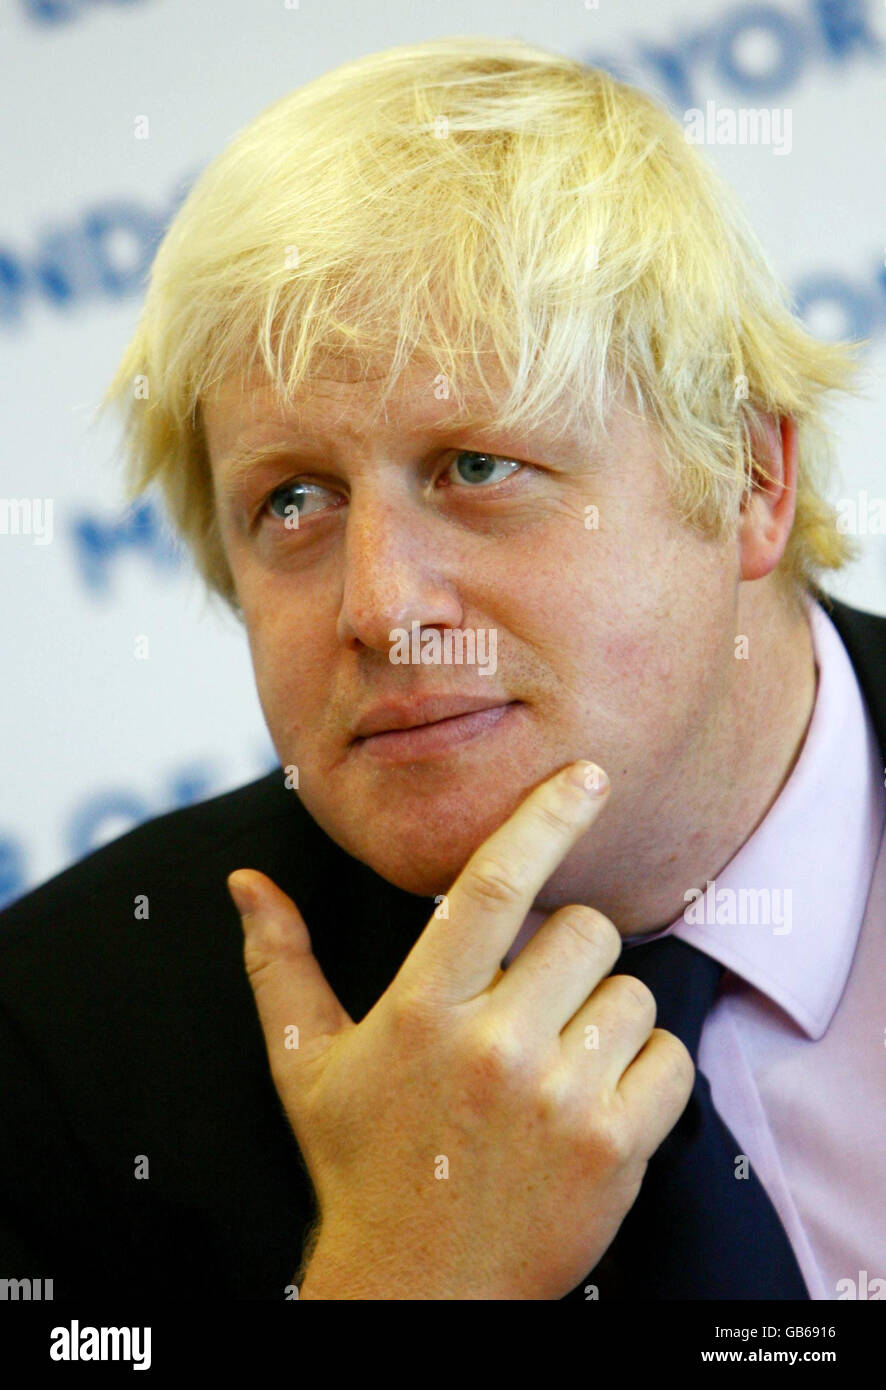 Mayor of London Boris Johnson during a news conference at Bexleyheath Police Station in Bexleyheath, Kent, after announcing plans for locations to benefit from new transport policing teams. Stock Photo